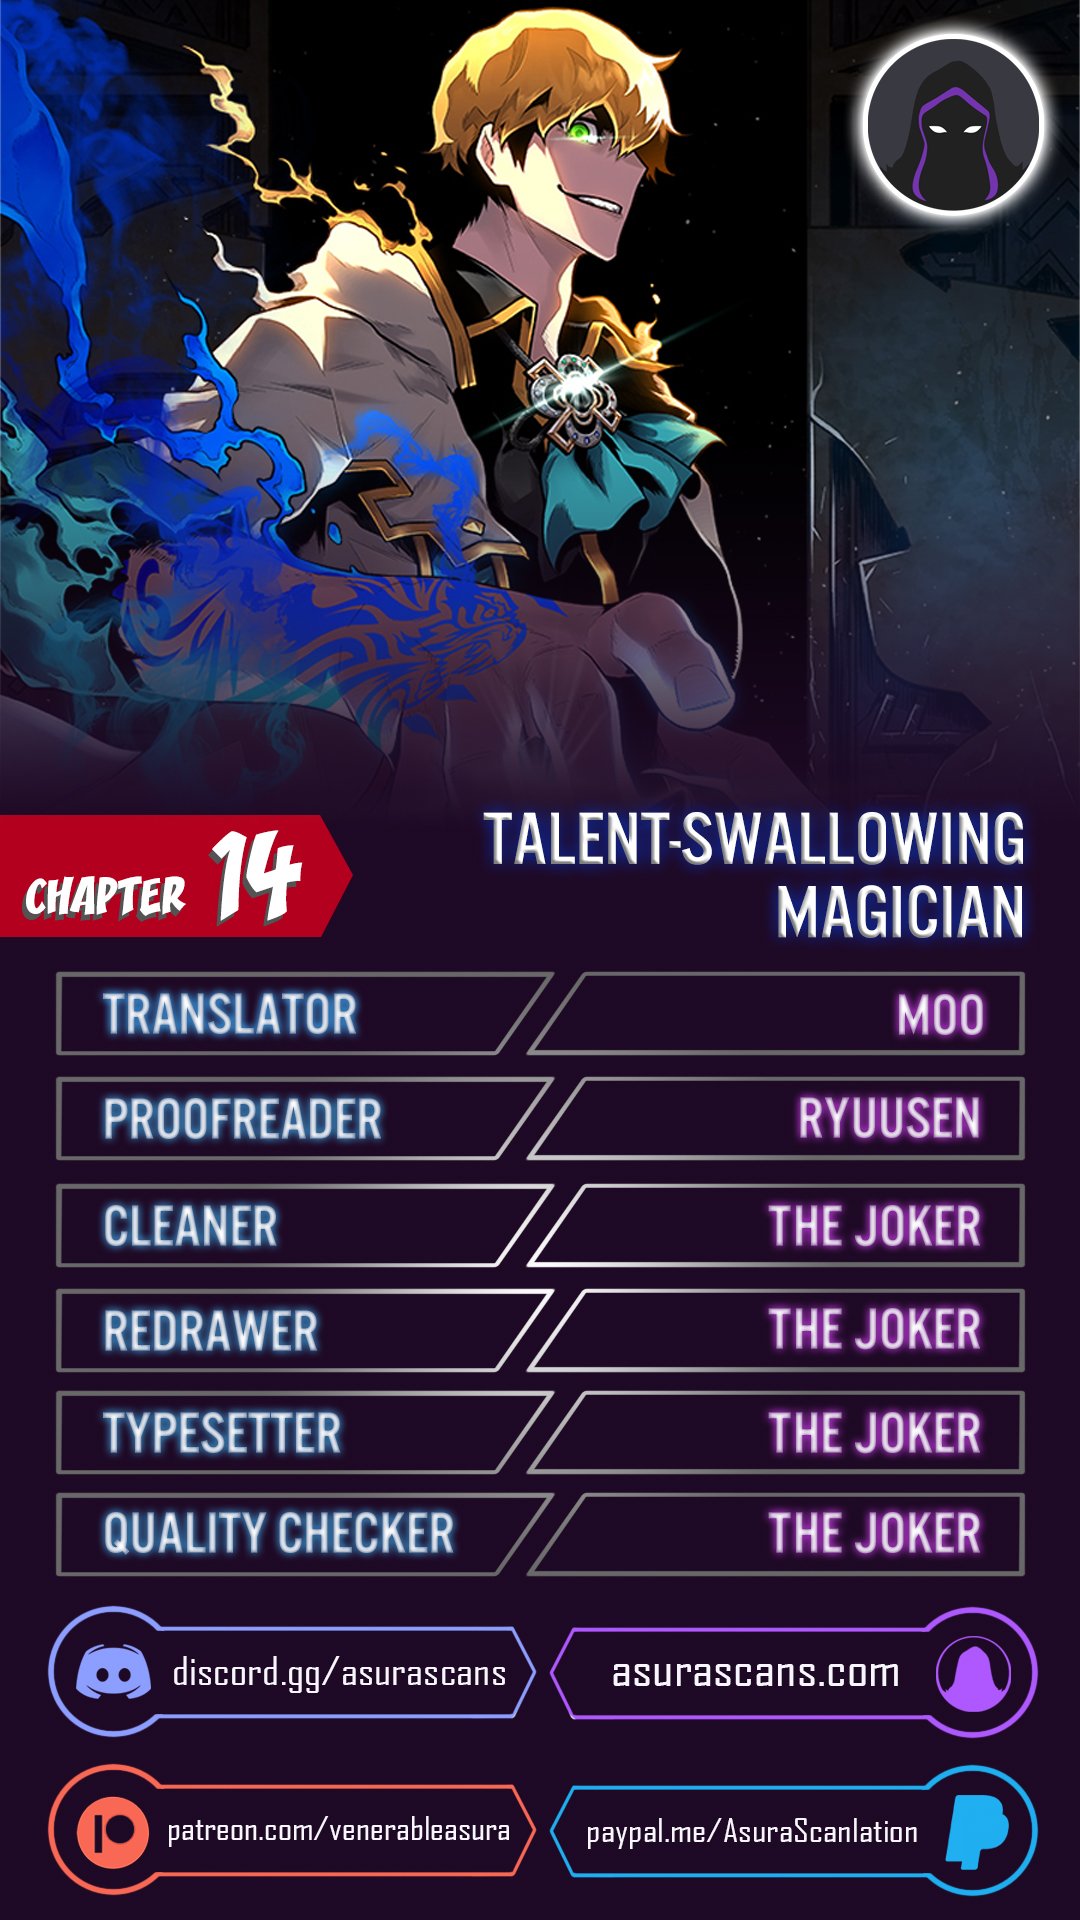 Talent-Swallowing Magician - Chapter 15412 - Image 1